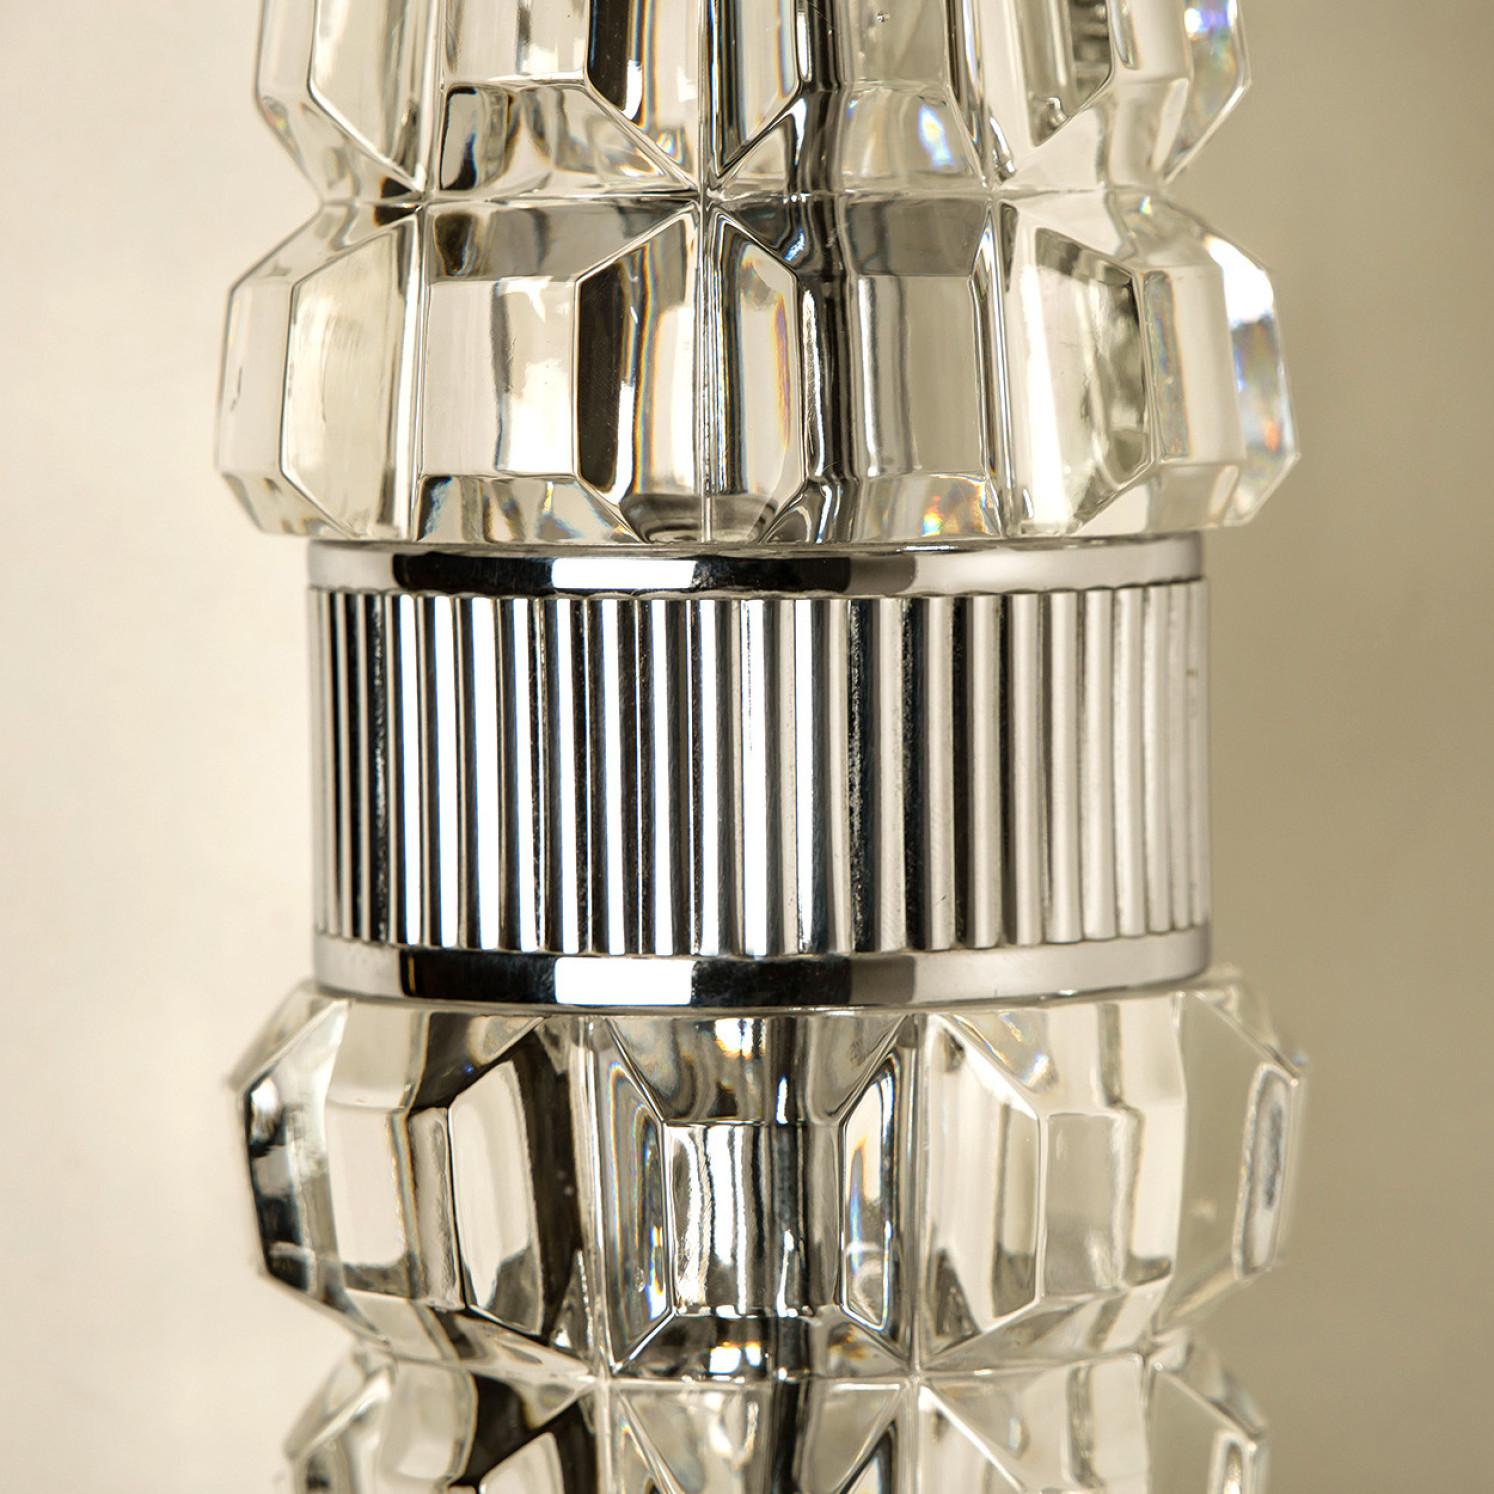 Hourglass Shaped Chrome Wallsconce, France, Europe, 1970s For Sale 2